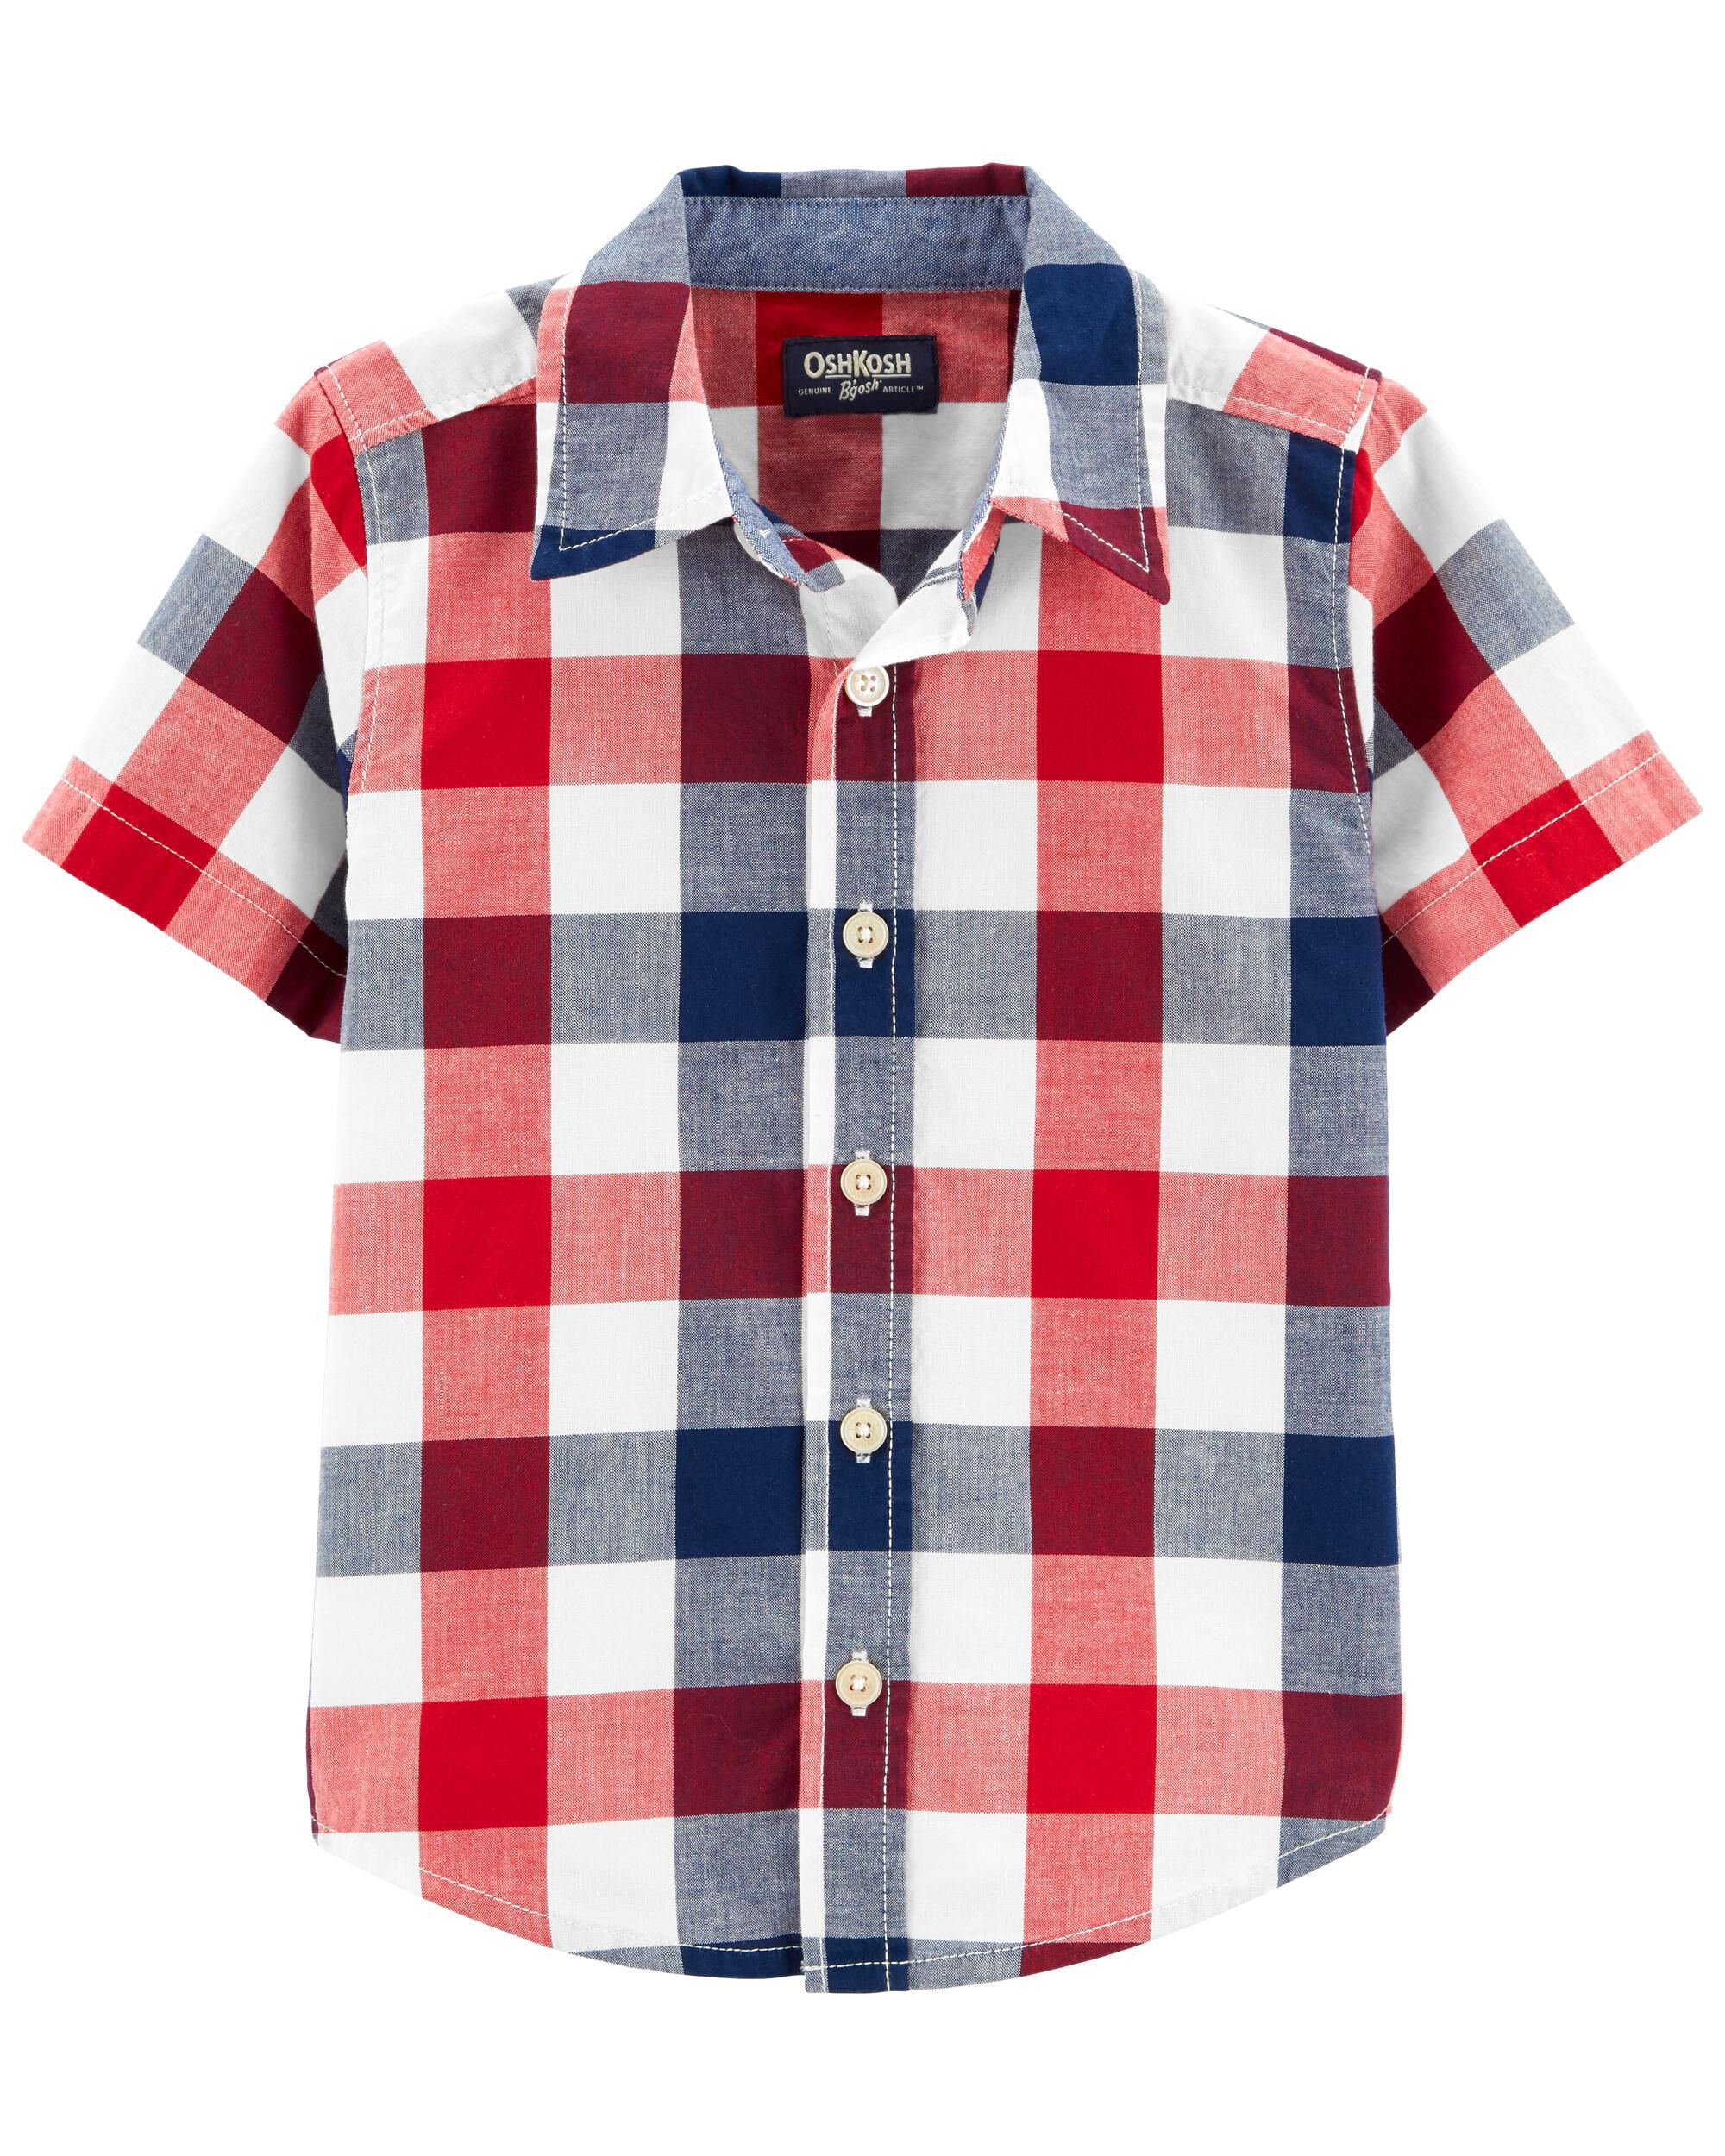 New with Tags Carters Boys Newborn Size Top Shirt Awesome Like My Uncle 